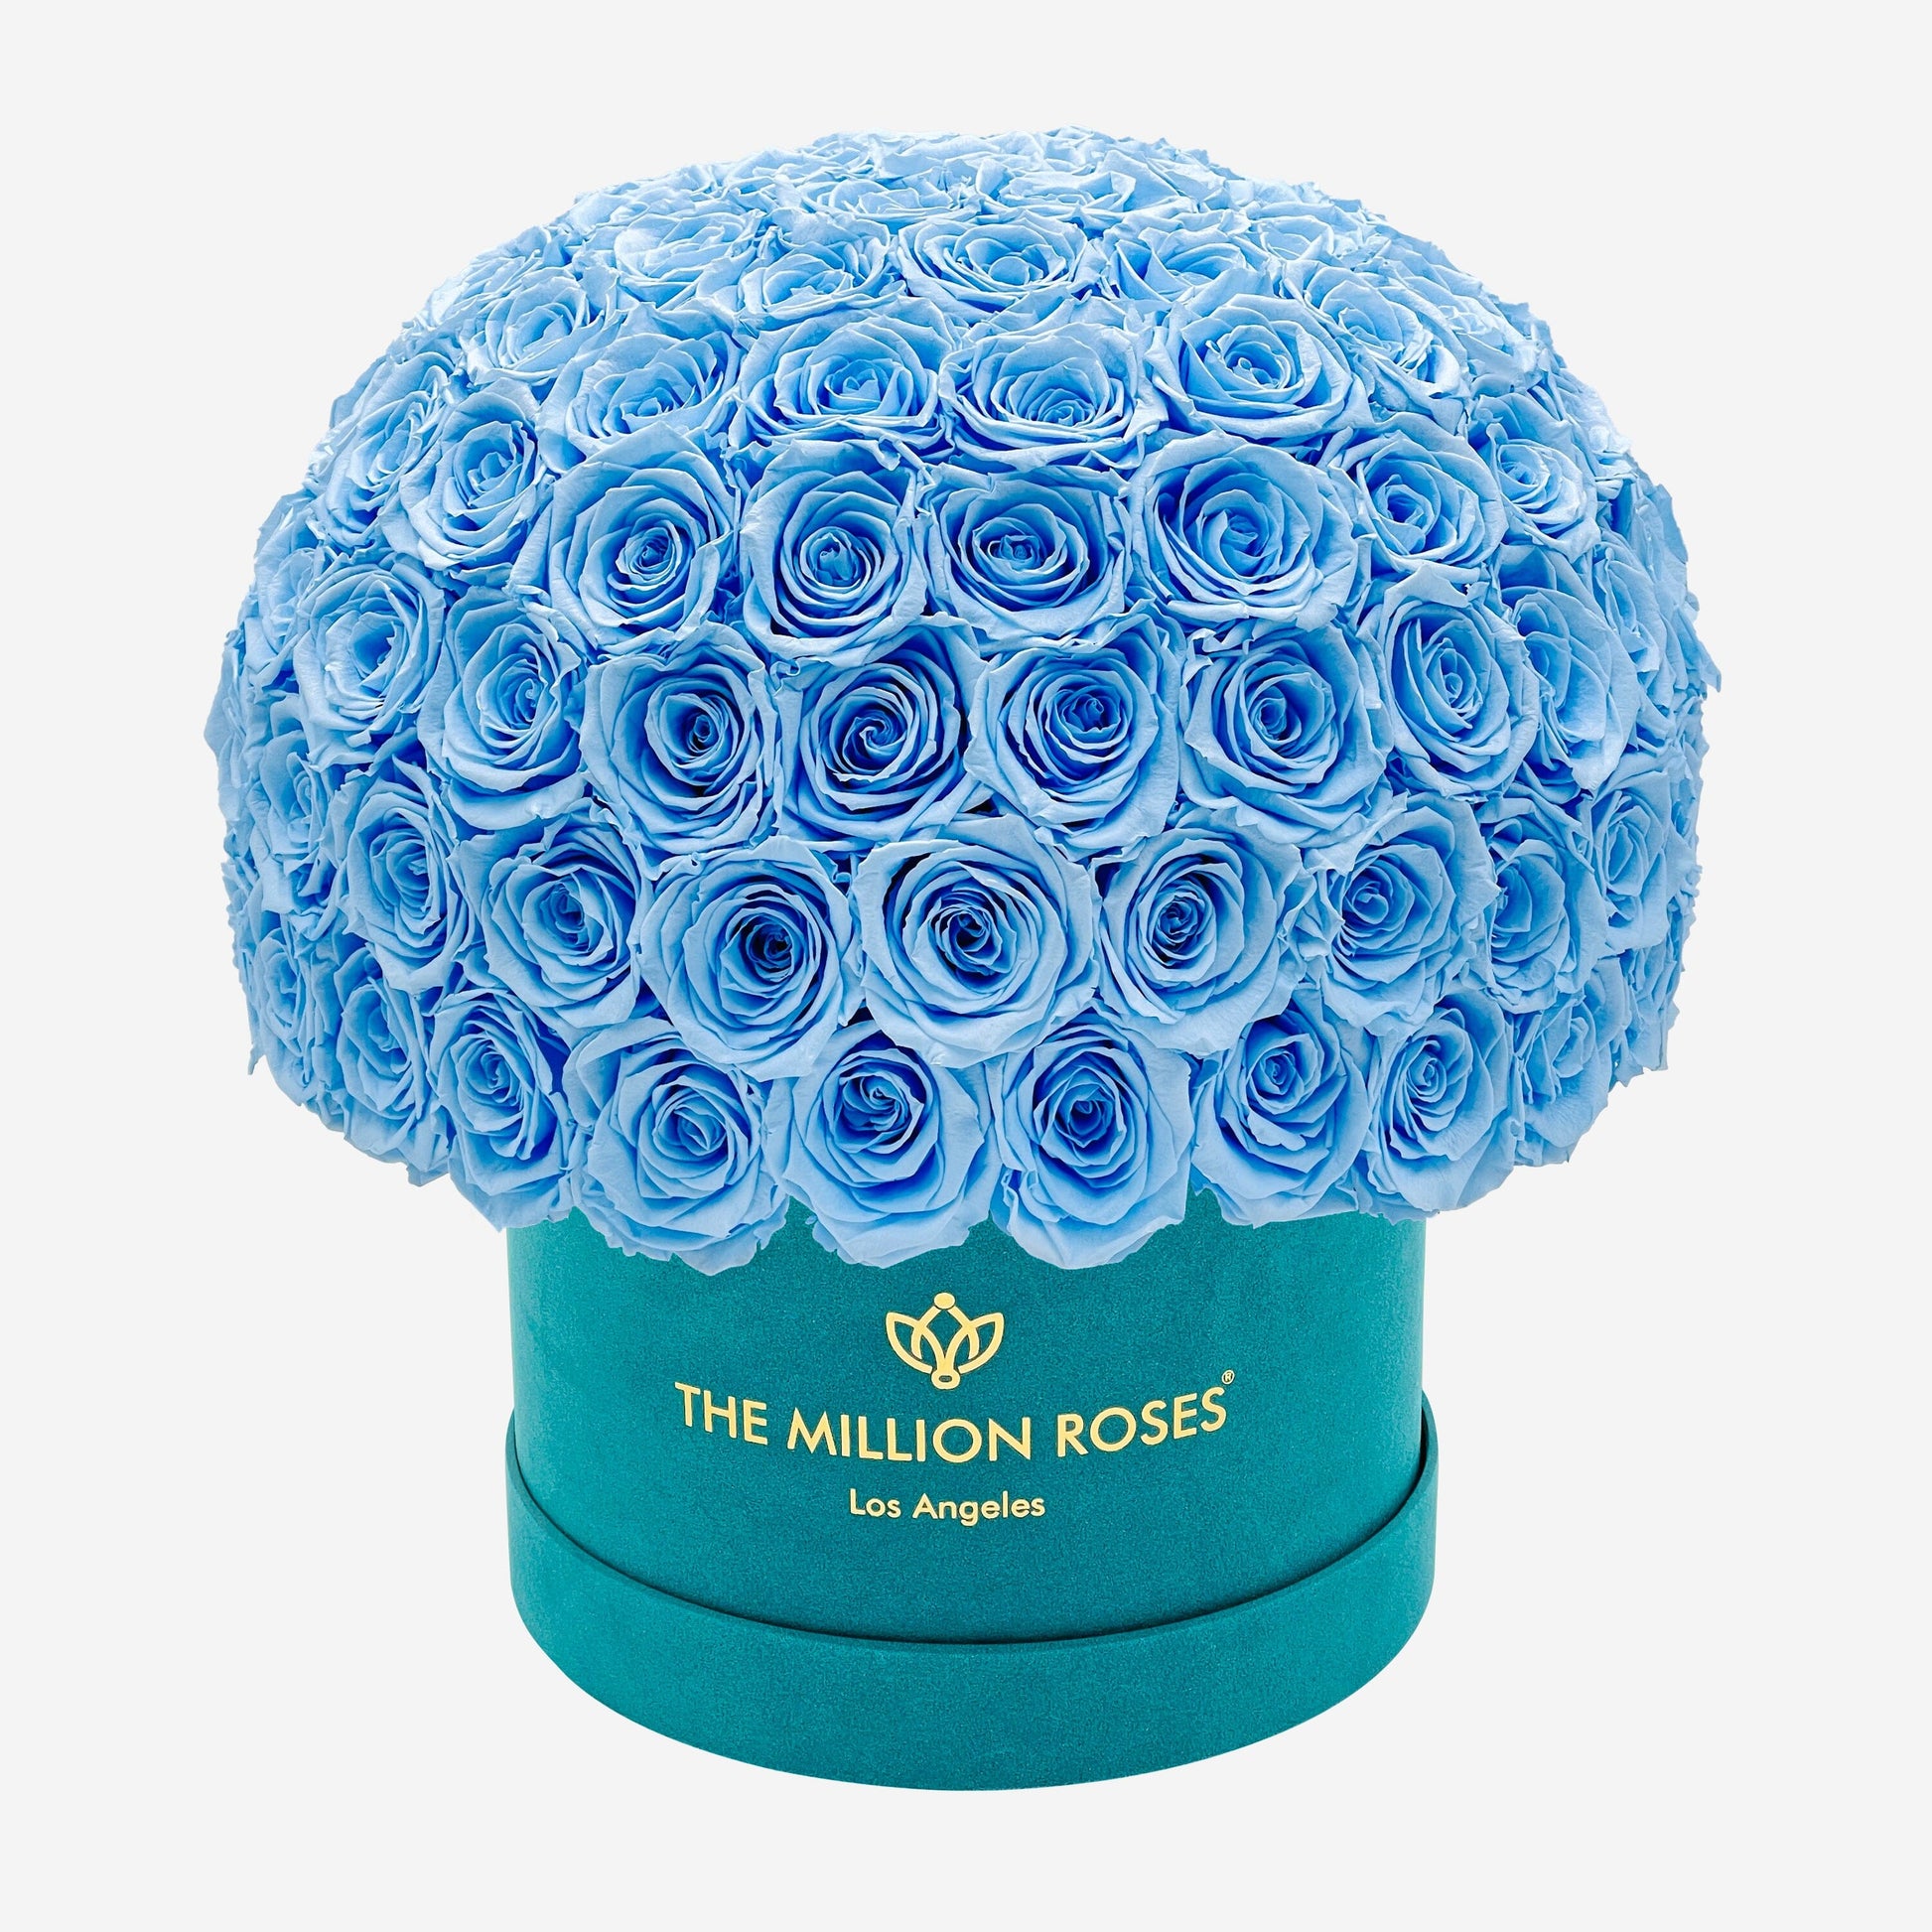 Supreme Dark Green Suede Superdome Box | Light Blue Roses - The Million Roses